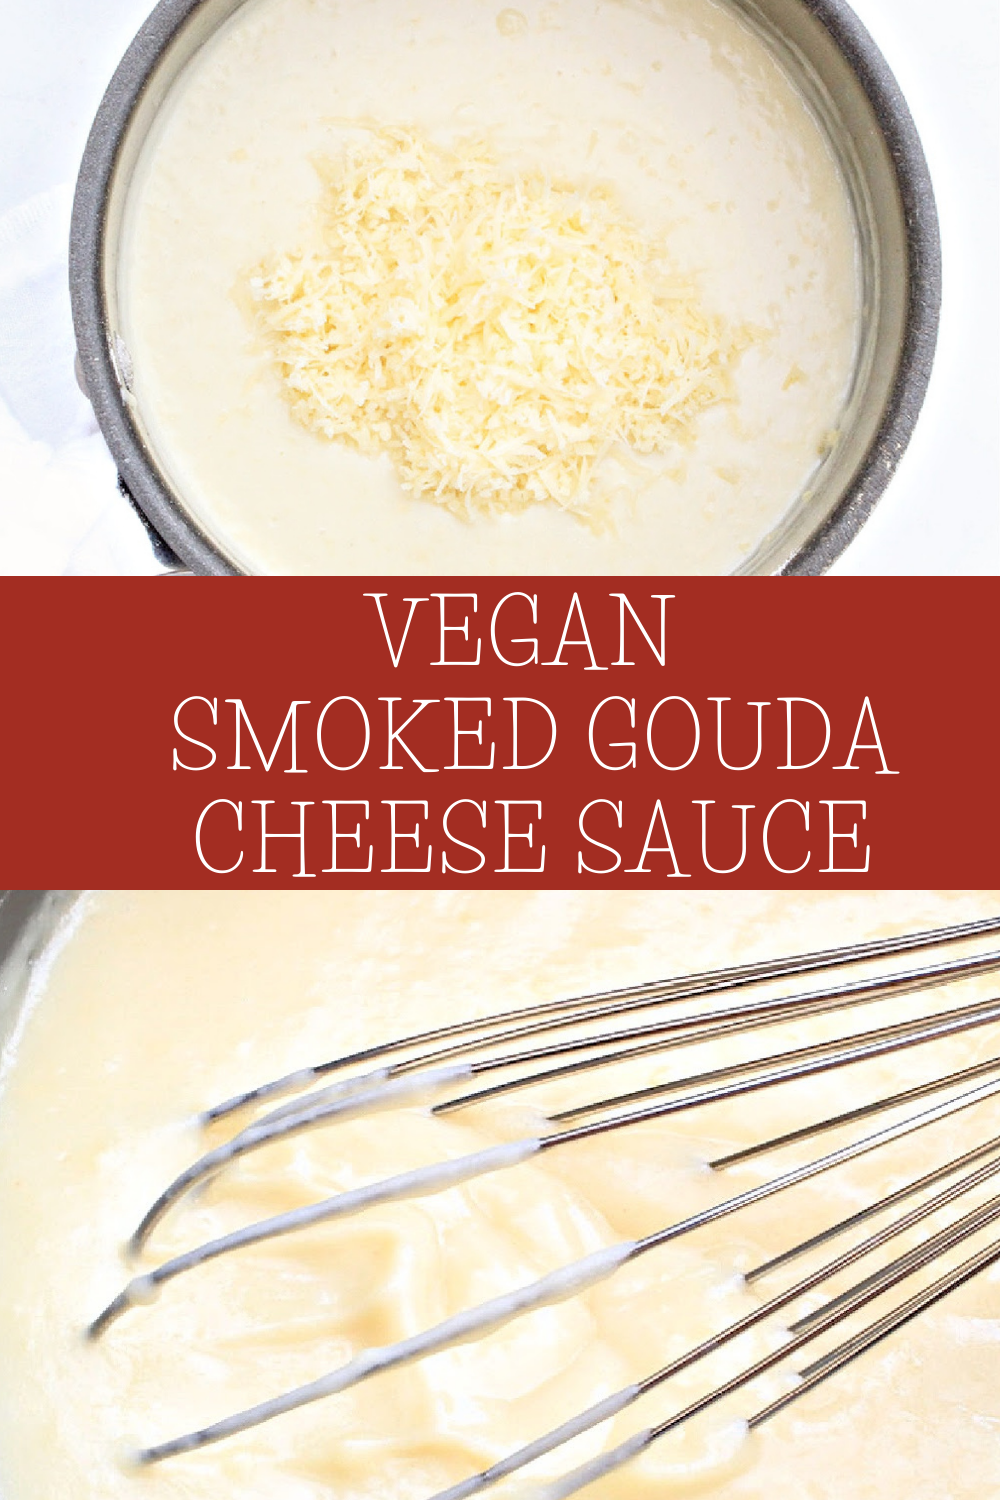 Smoked Gouda Cheese Sauce ~ 4 simple ingredients are all you need! Rich, creamy, and beats store-bought vegan cheese sauces any day! via @thiswifecooks